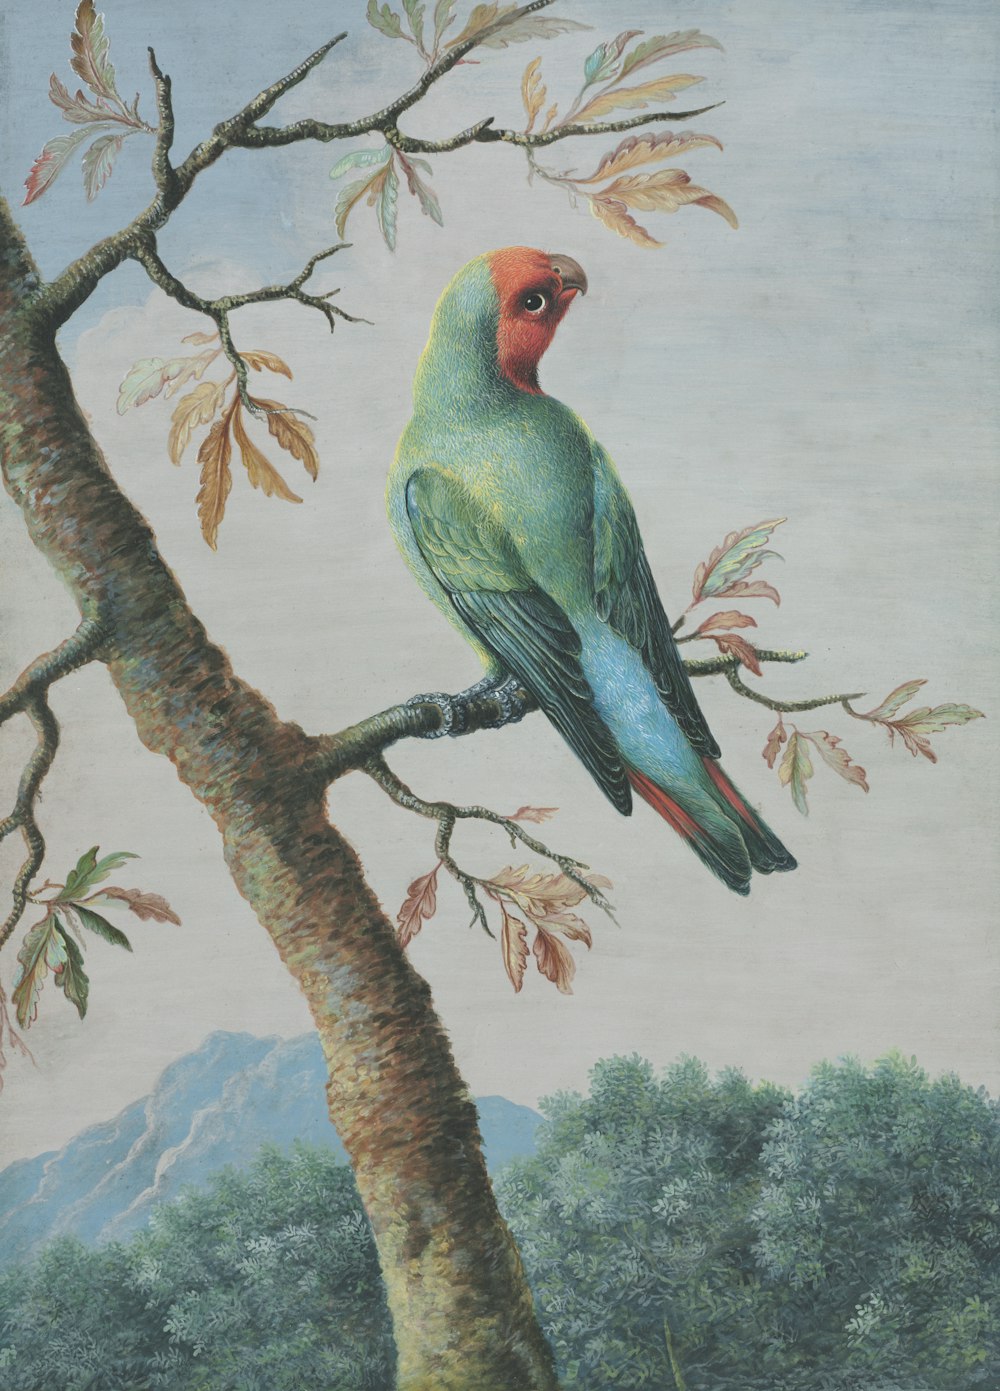 a painting of a parrot perched on a tree branch